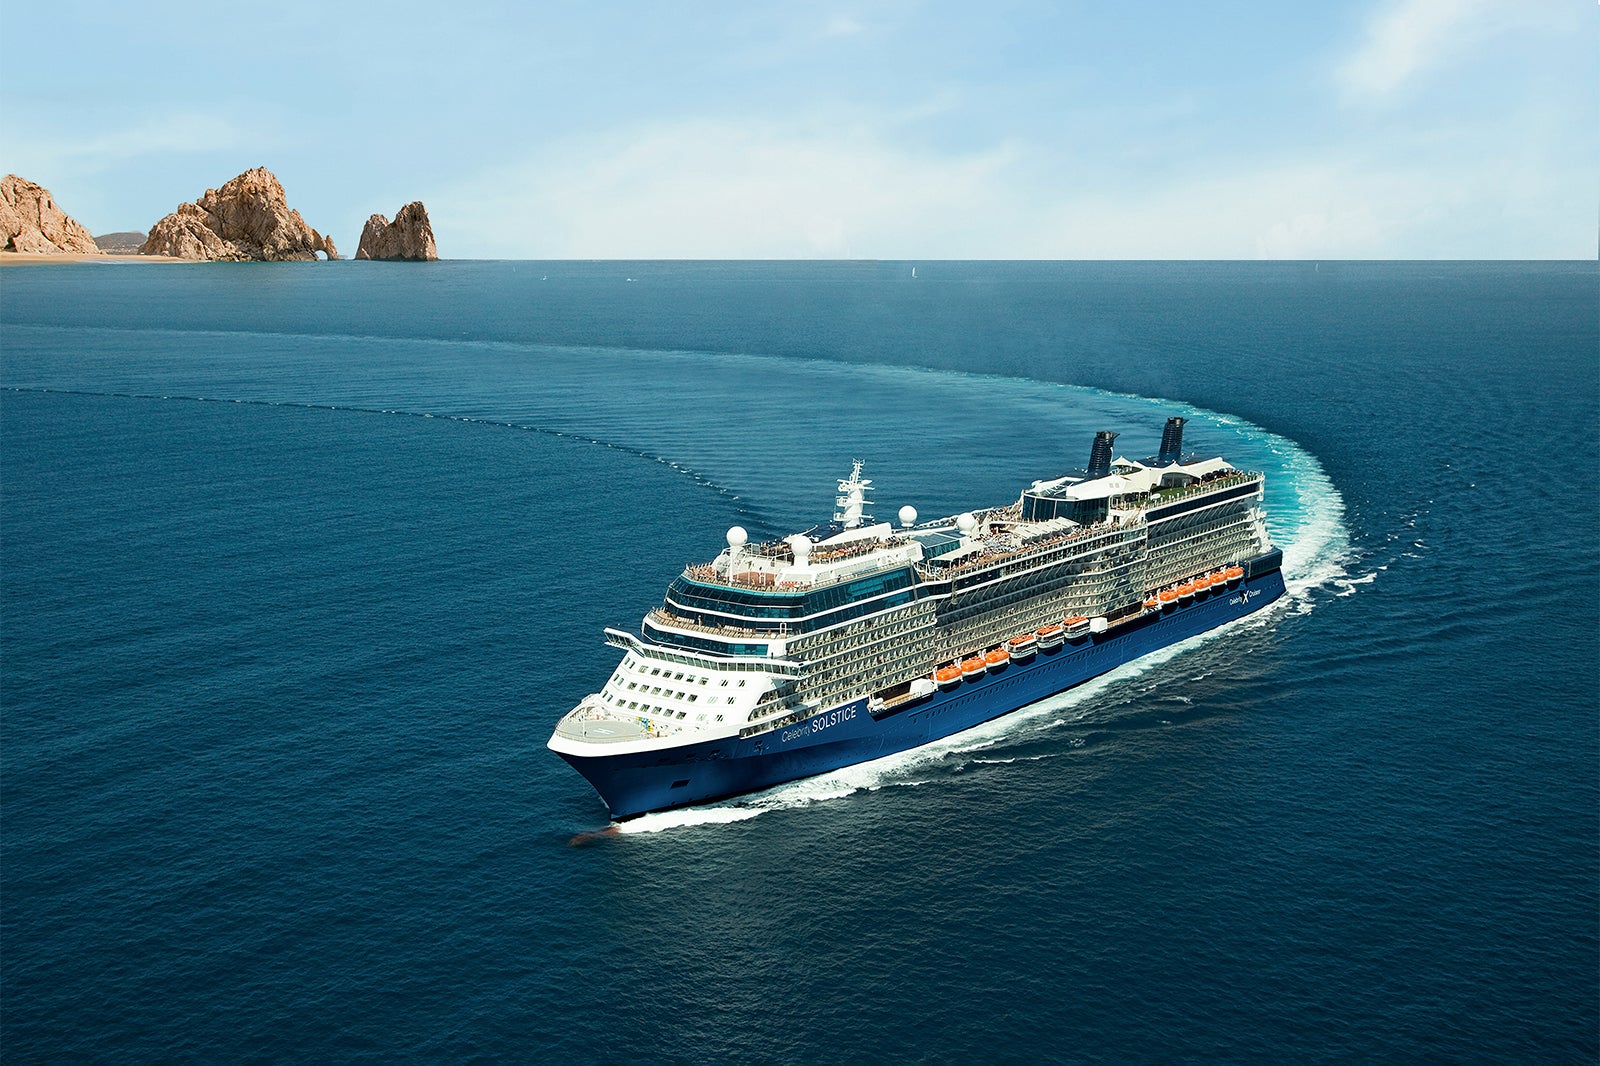 princess cruises internet packages cost